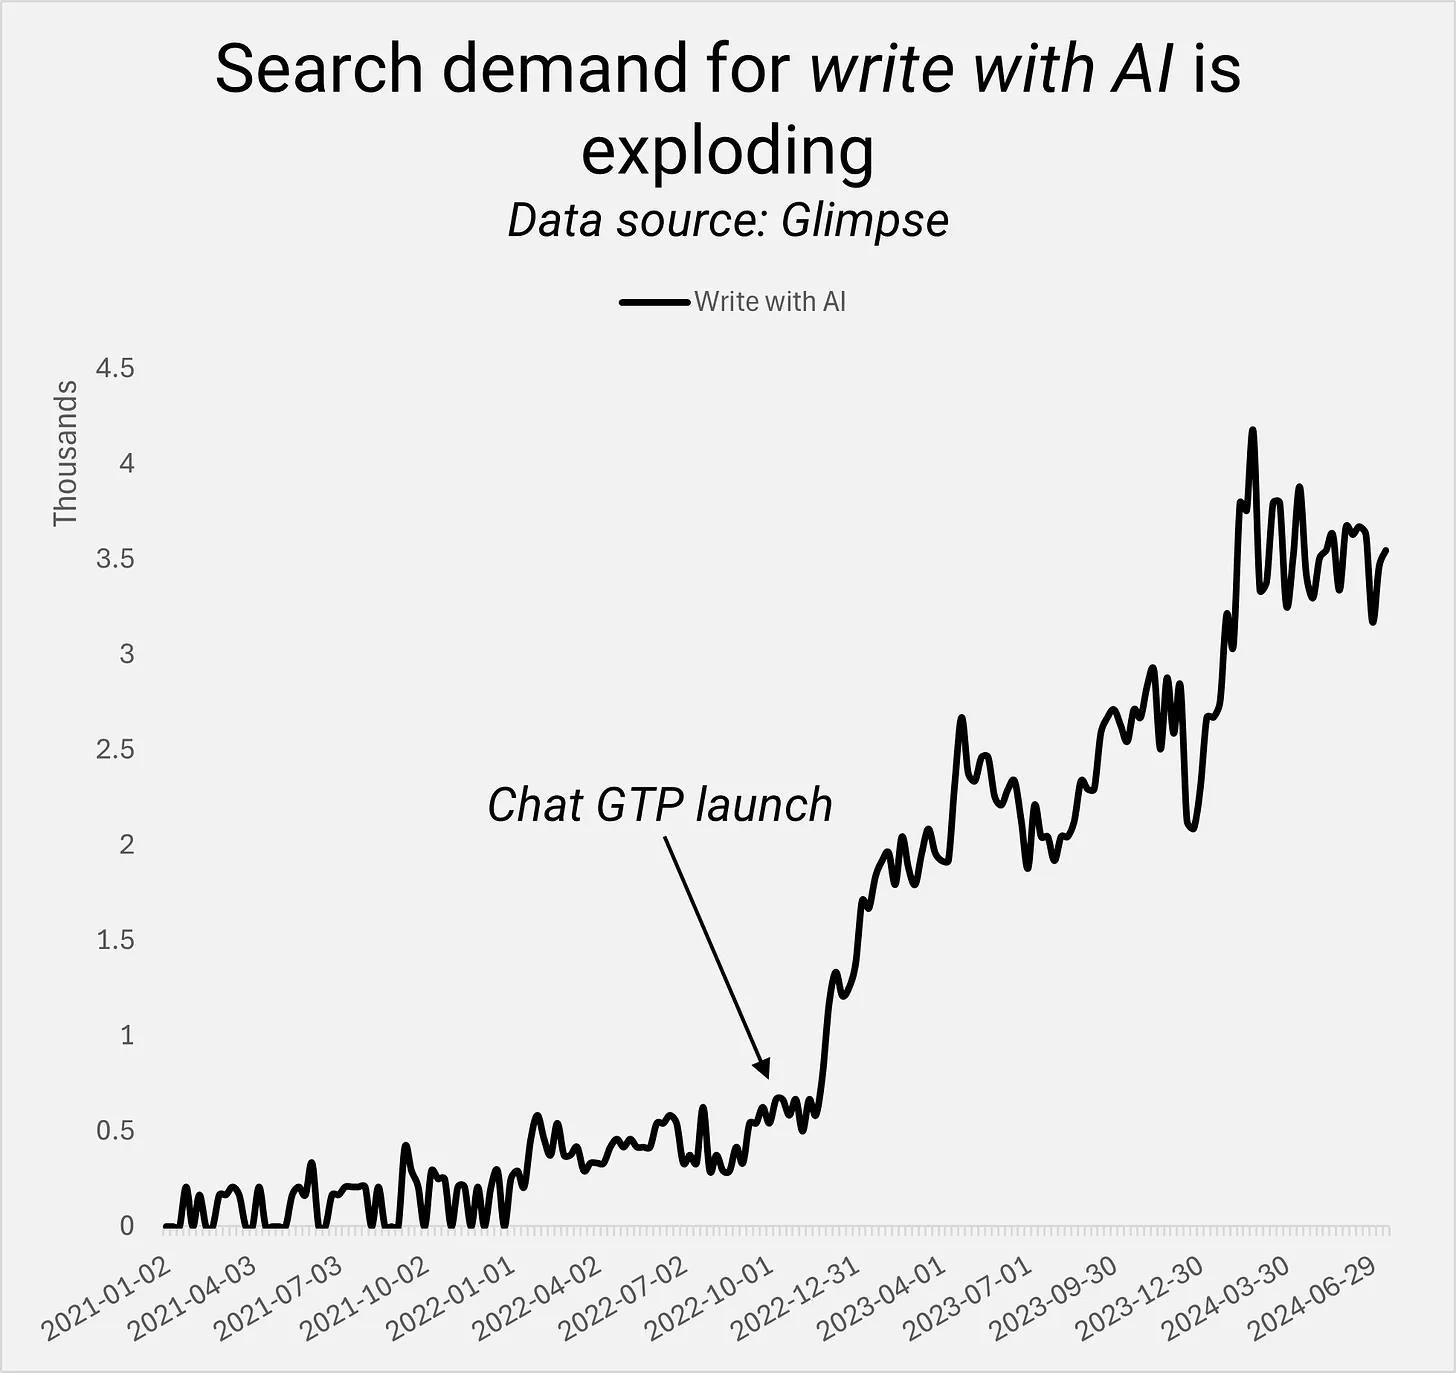 Search demand for write with AI is exploding